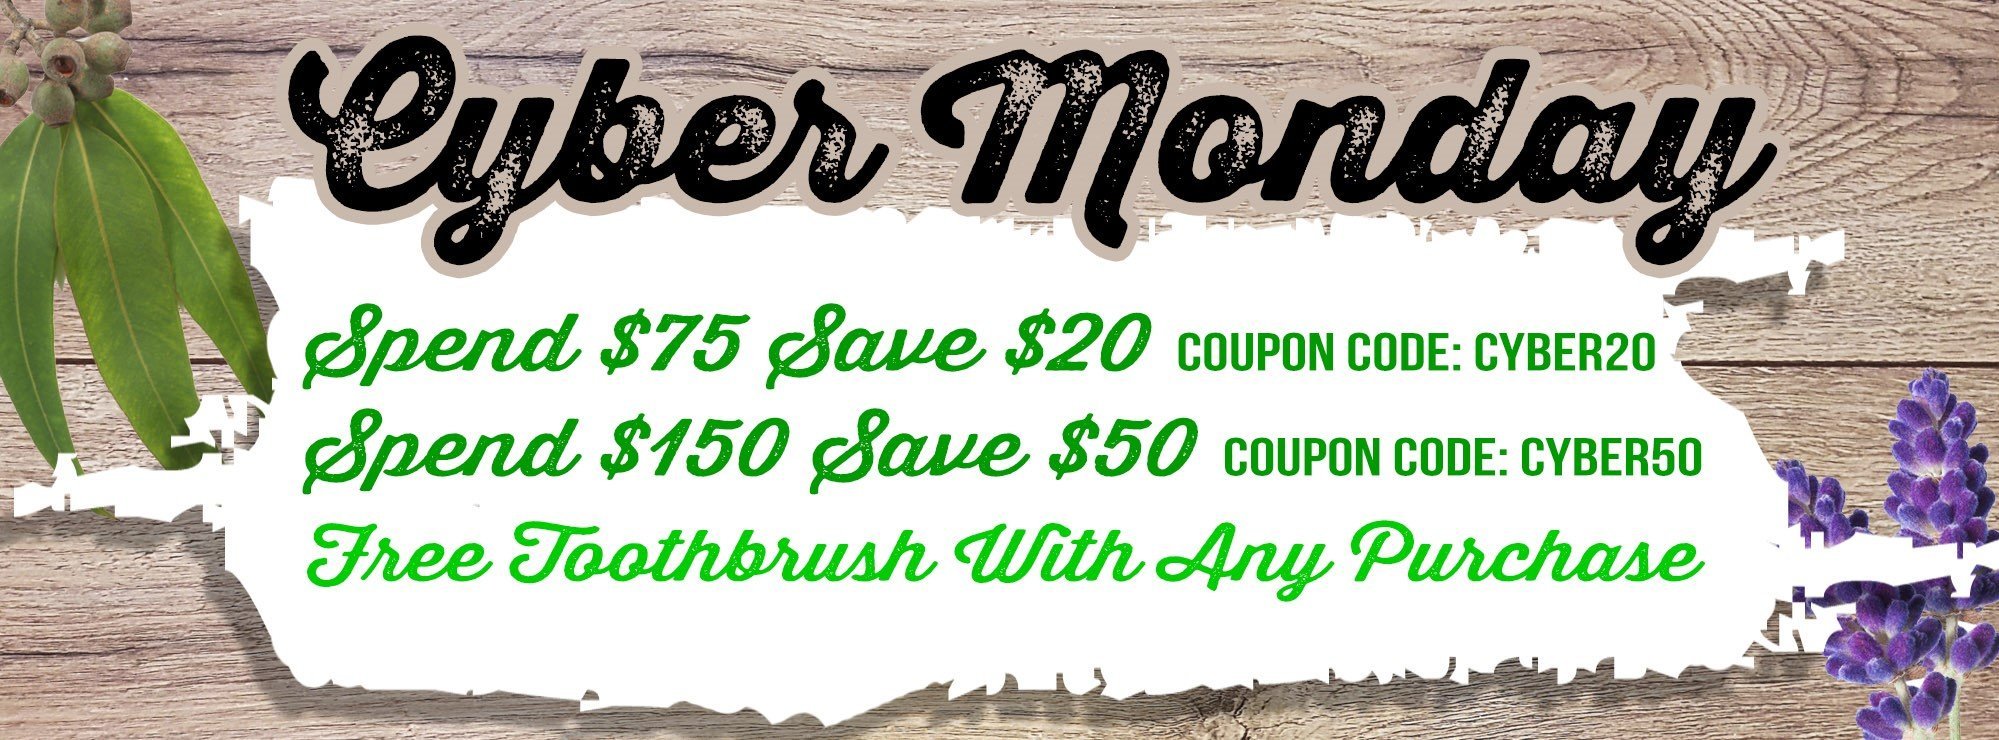 Cyber Monday Sale! | The Dirt - Super Natural Personal Care